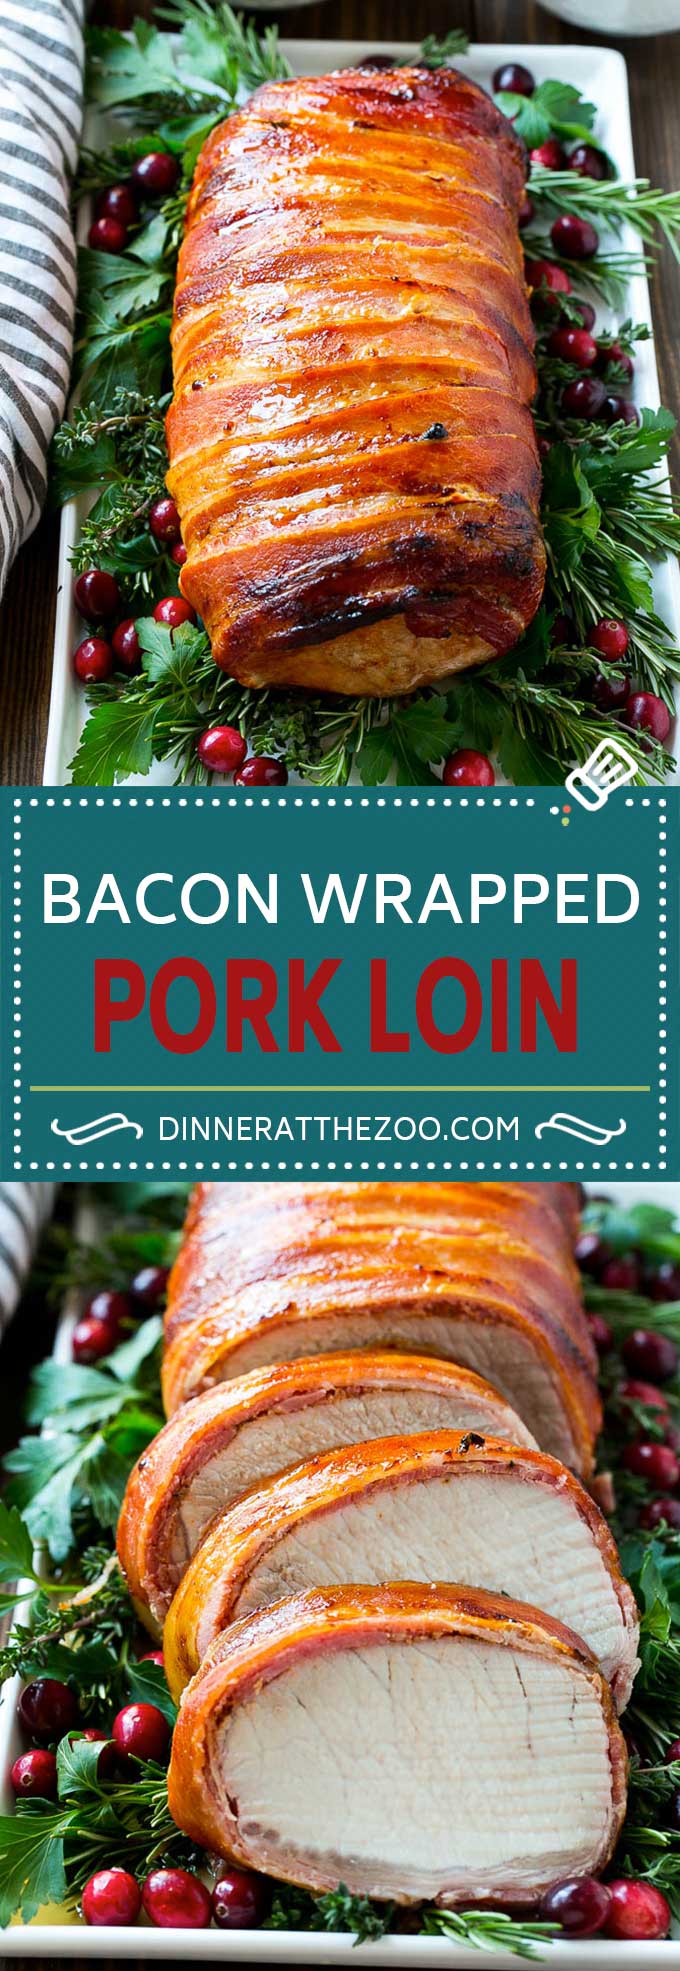 Bacon Wrapped Pork Loin Recipe | Bacon Wrapped Pork Roast | Grilled Pork Loin | Grilled Pork Recipe #bacon #pork #dinner #grilling #dinneratthezoo